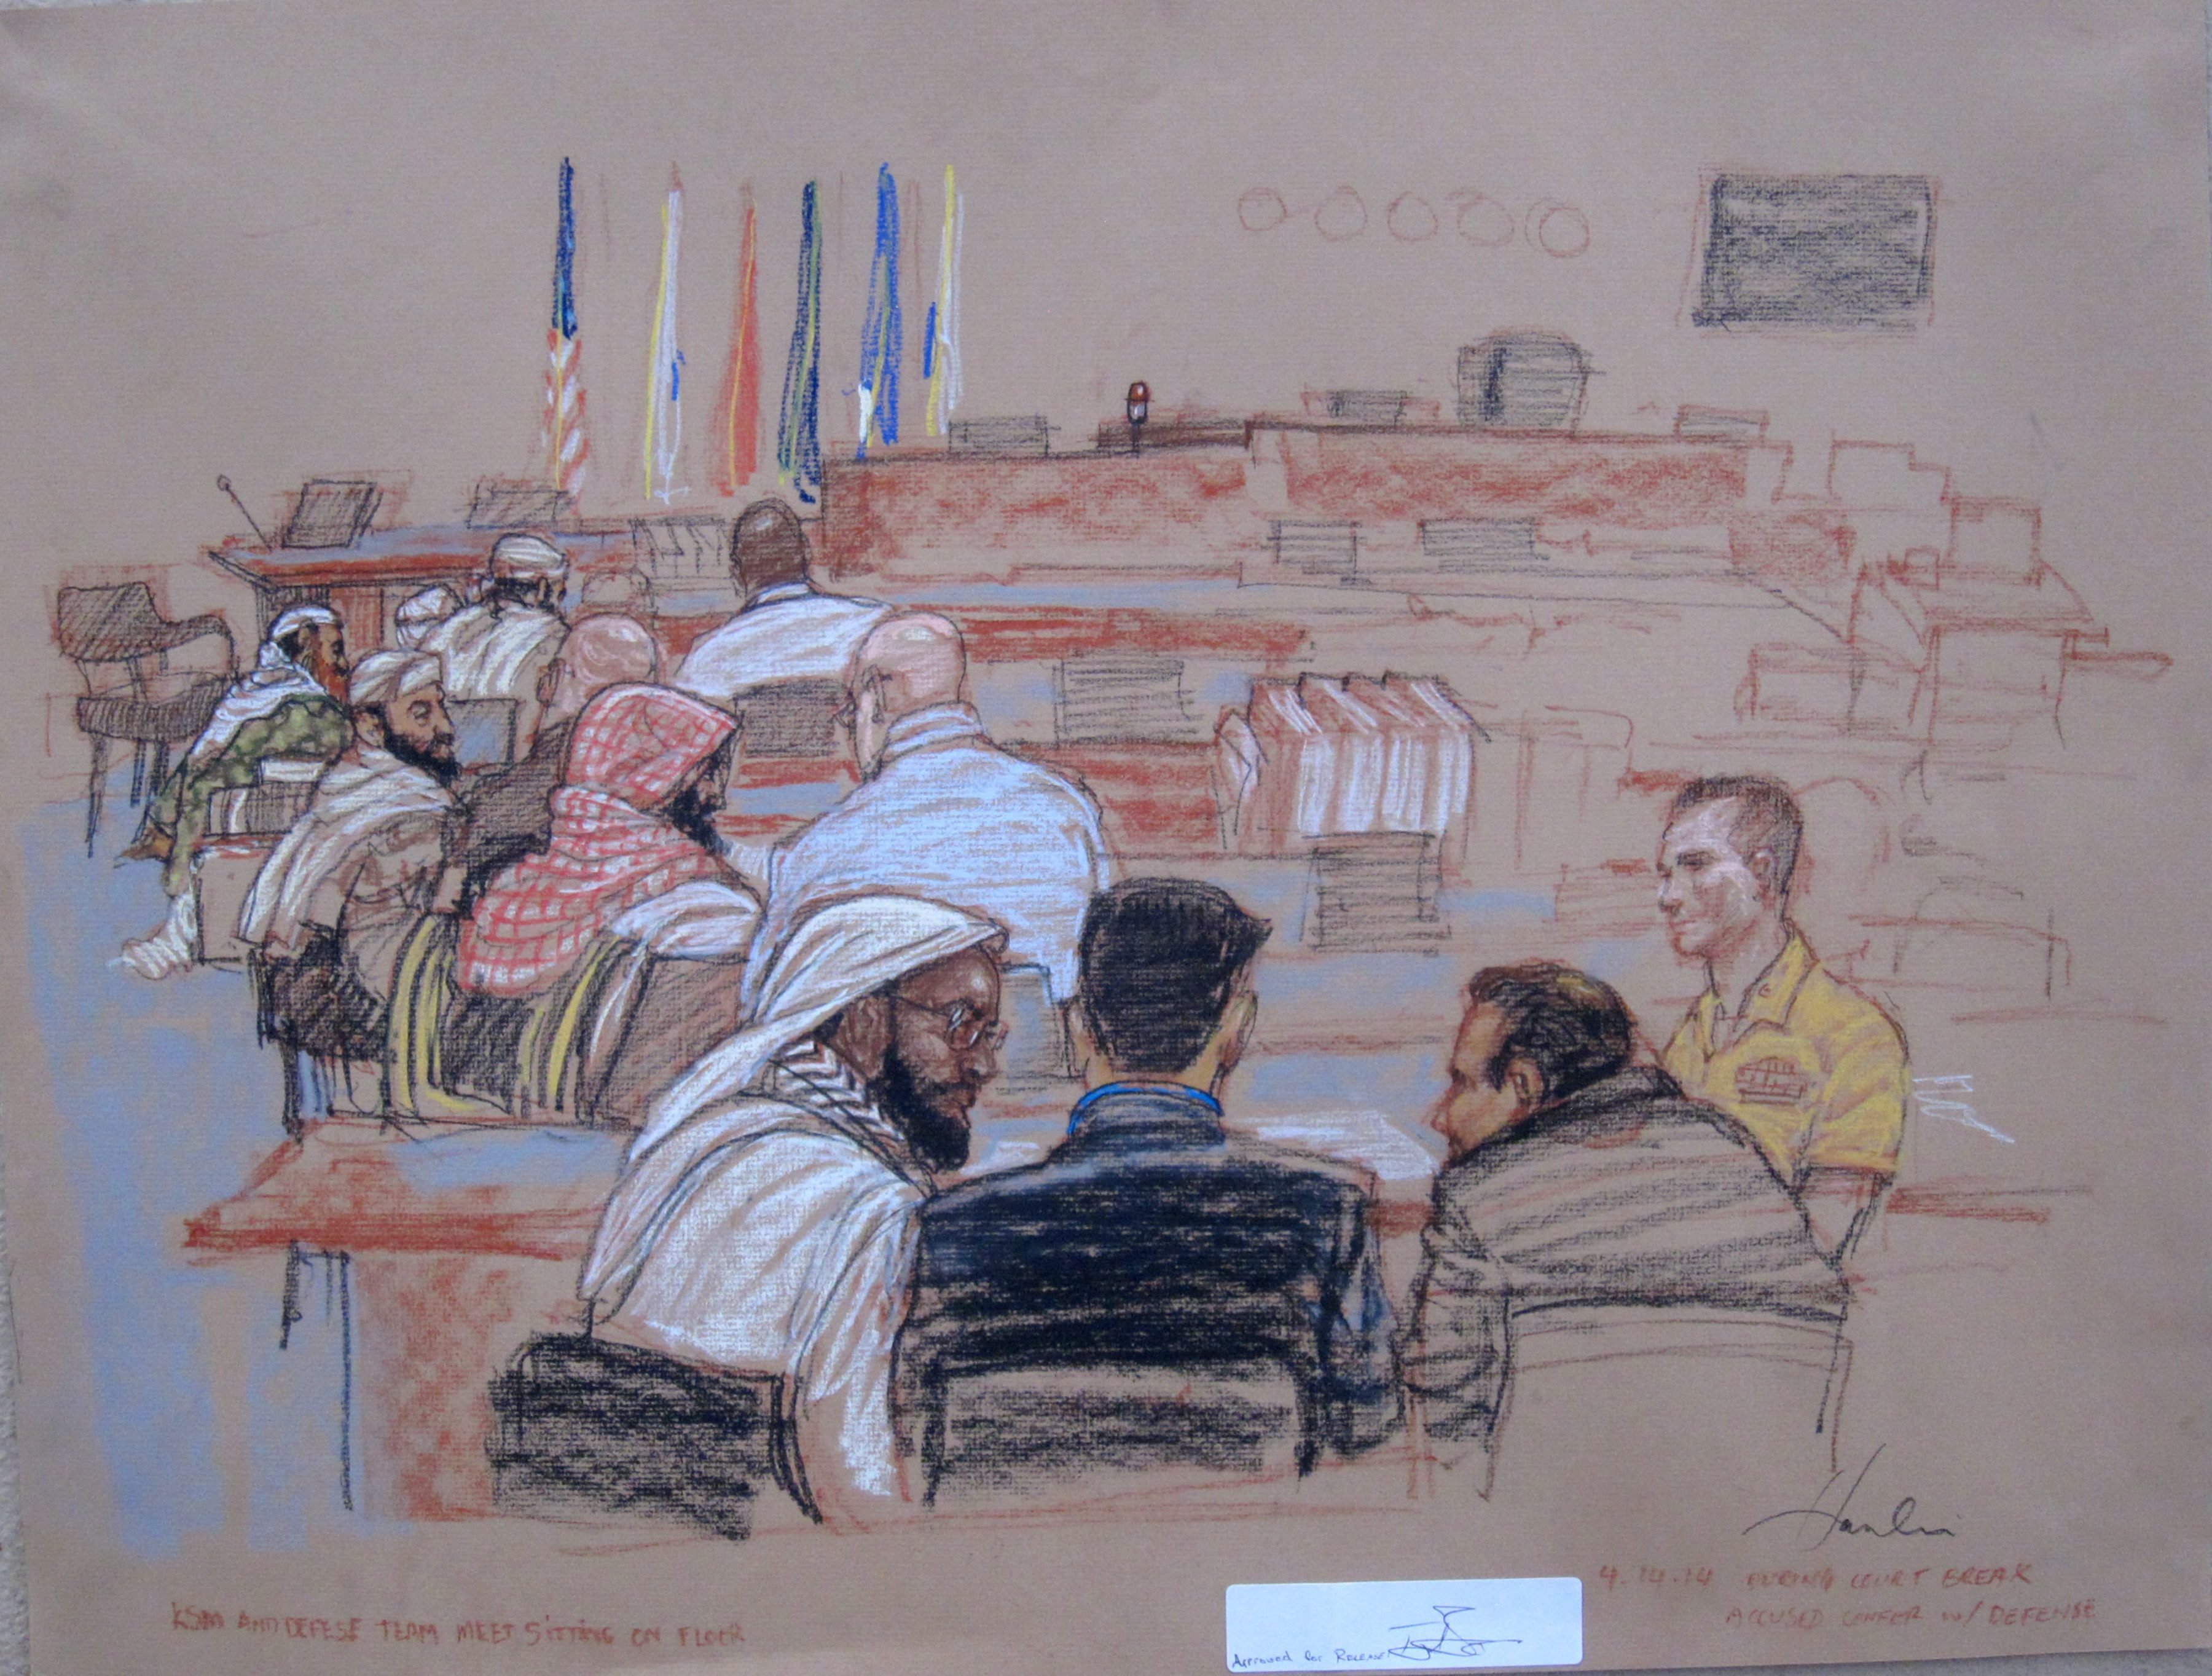 The 9/11 accused confer with their defense lawyers during a break in pretrial hearings at the U.S. Navy base Guantanamo Bay, Cuba, on April 14, 2014. (Janet Hamlin—EPA)